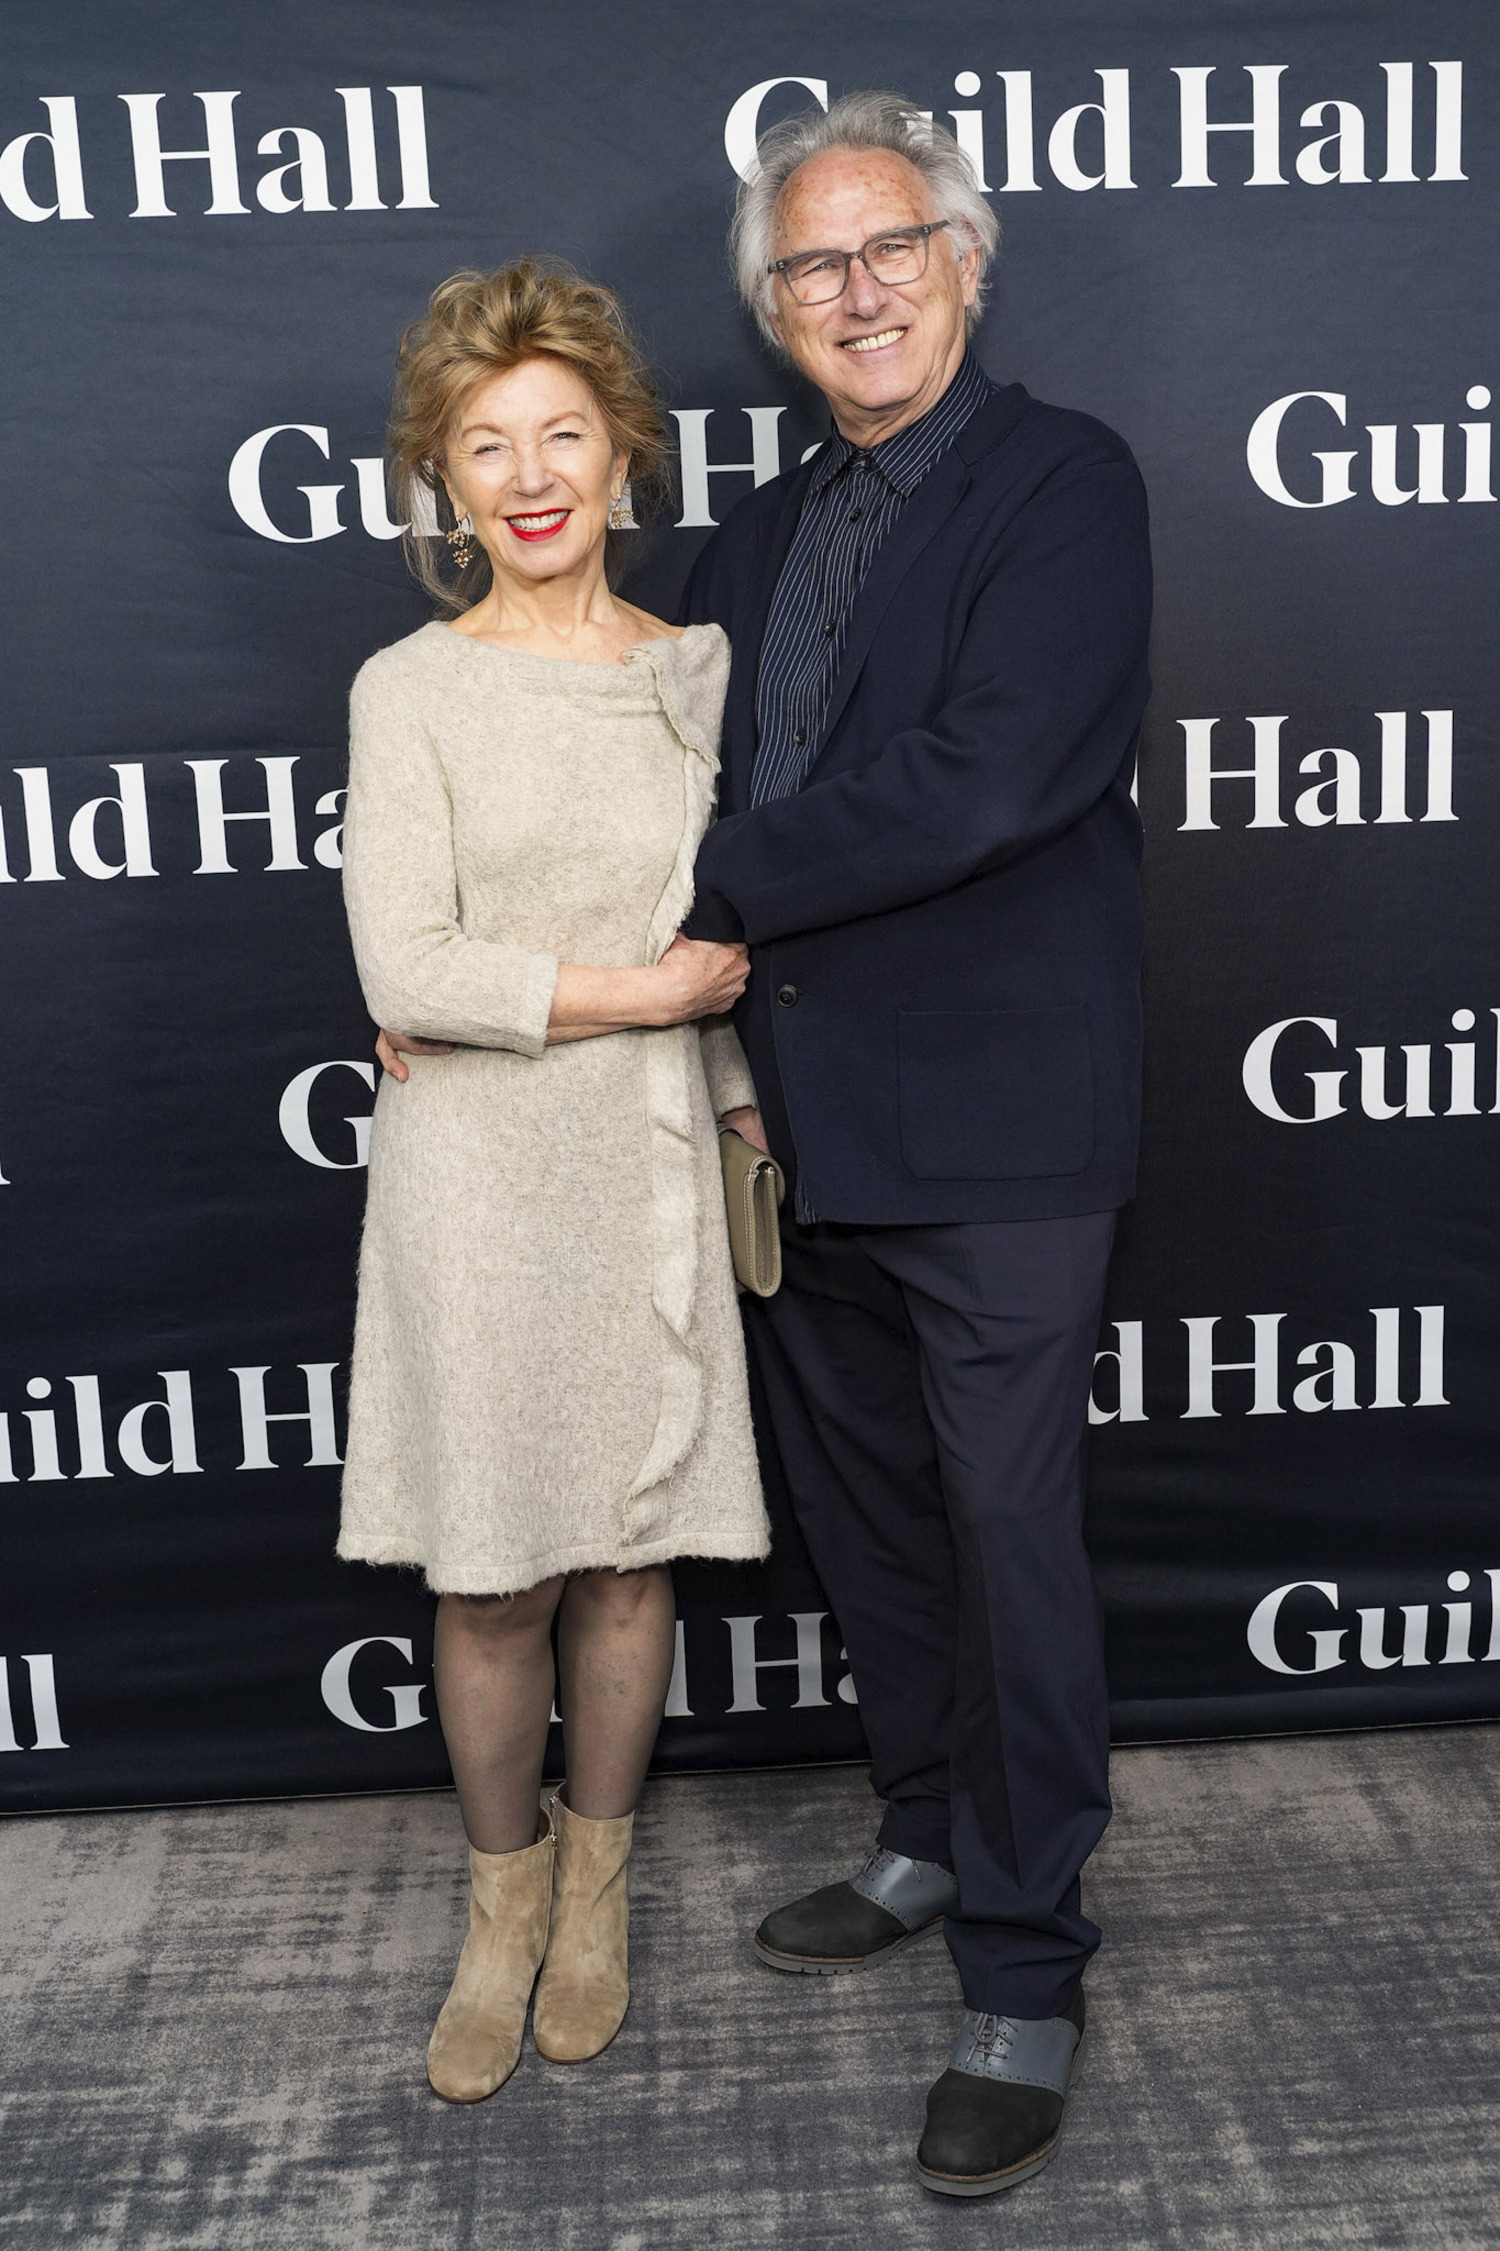 April Gornik and Eric Fischl at Guild Hall's 38th annual Academy of the Arts Achievement Awards Dinner on April 3, at the Rainbow Room in New York City.           Sean Zanni for Patrick McMullan